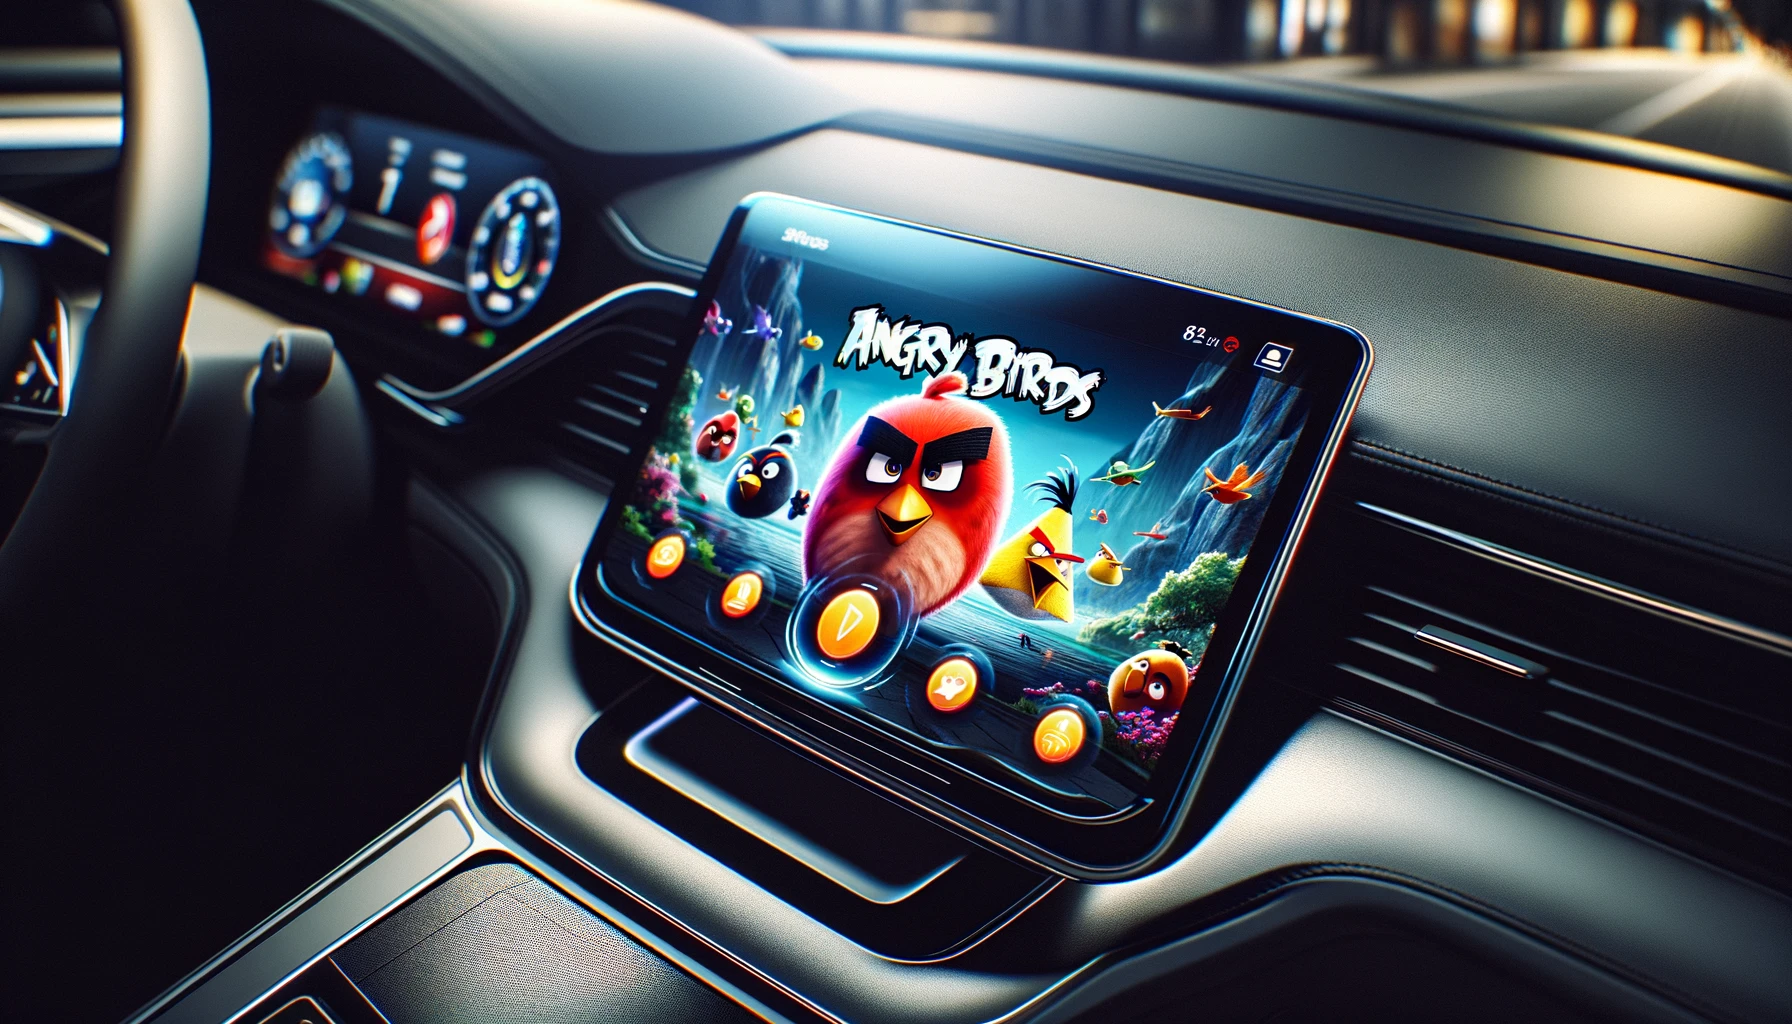 Google Integration Brings Angry Birds and More to Cars